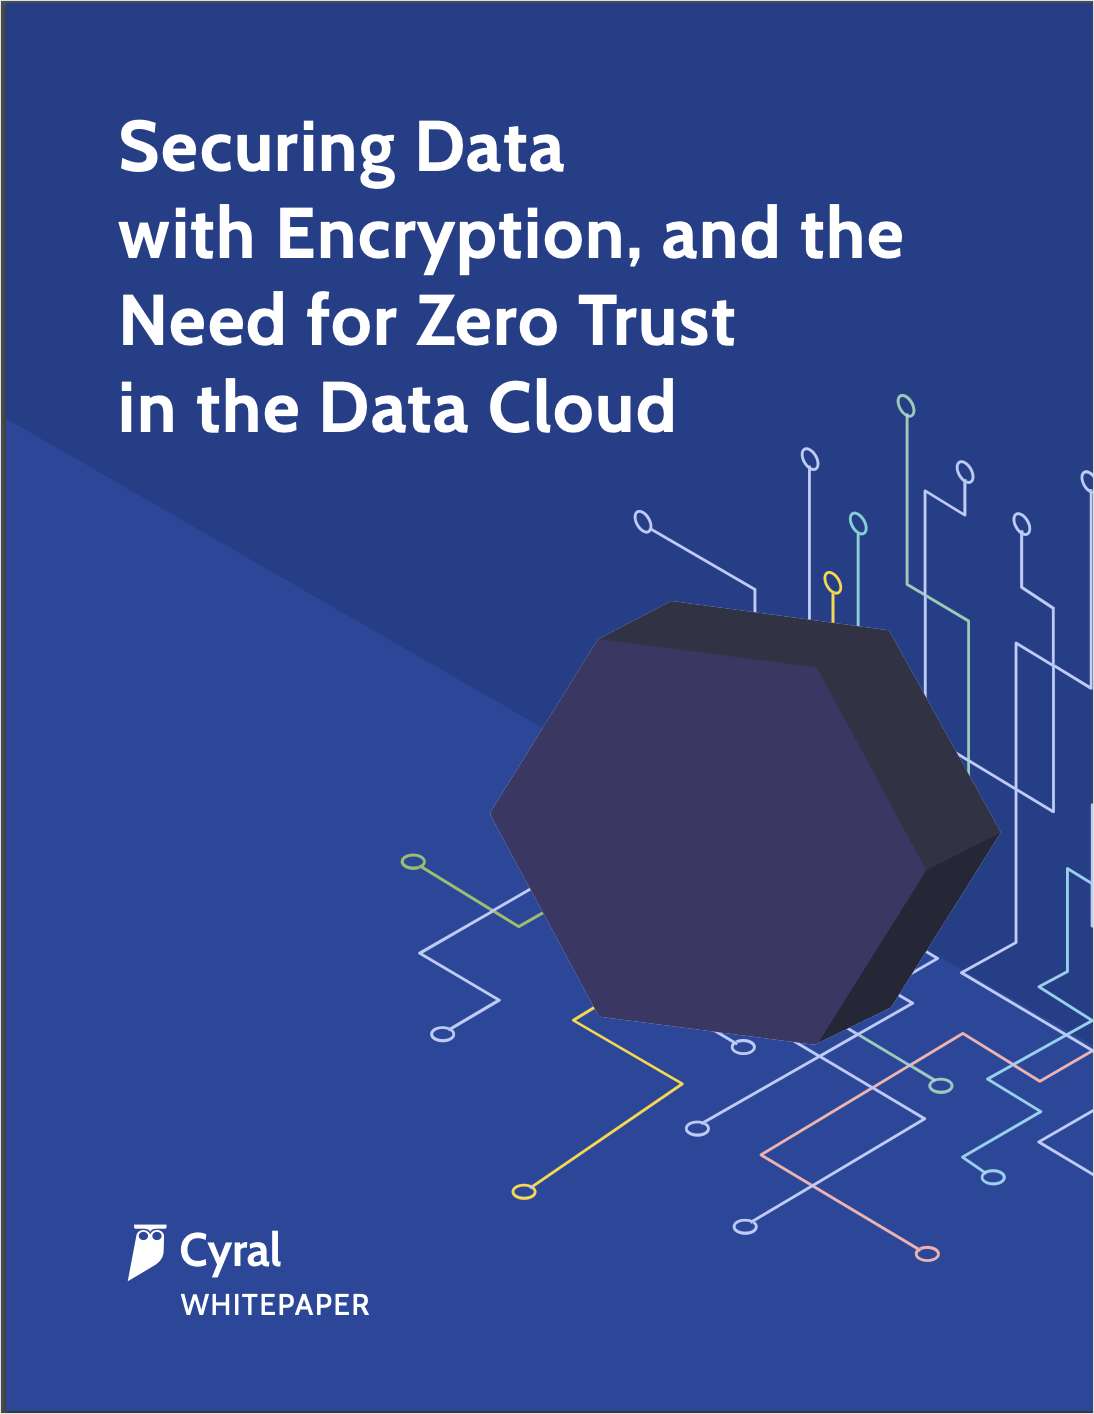 Securing Data with Encryption: The Need for Zero Trust in the Data Cloud